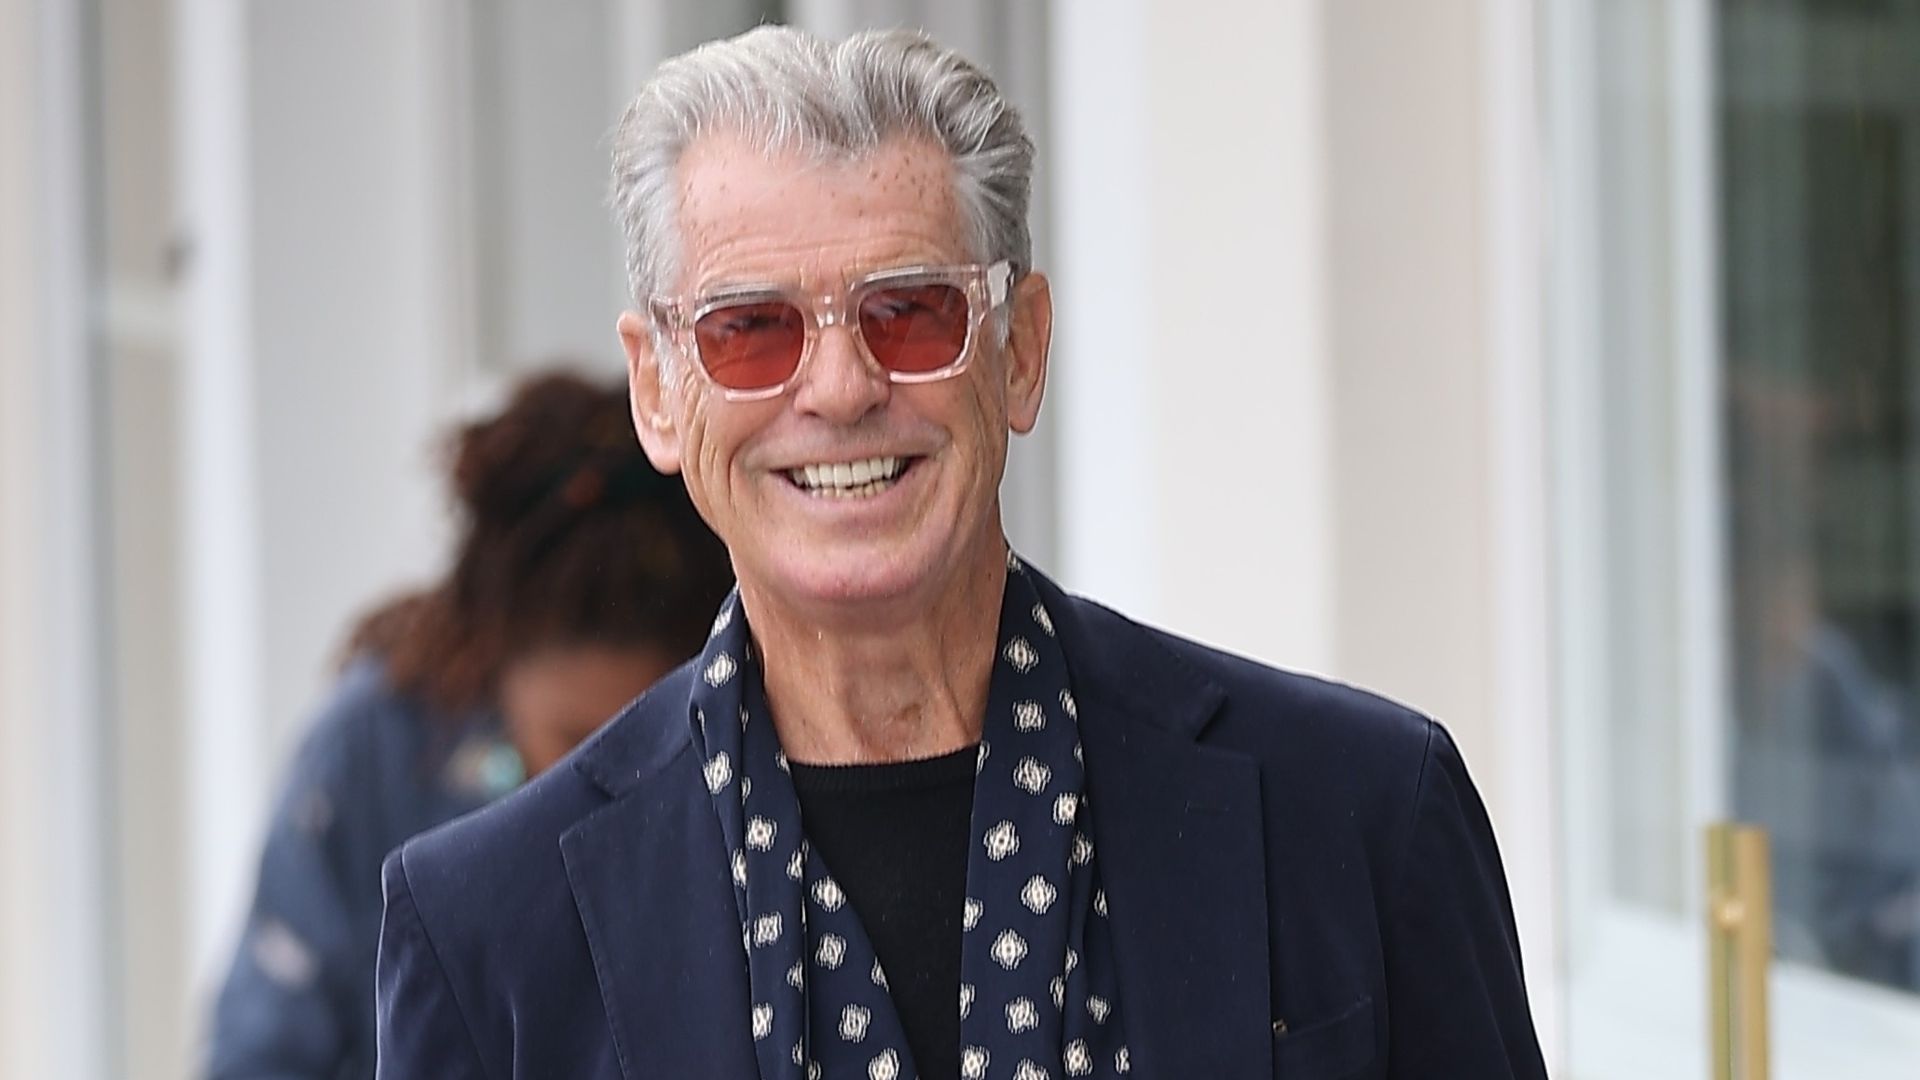 Pierce Brosnan stepped out in Malibu after pleading not guilty to trespassing charges